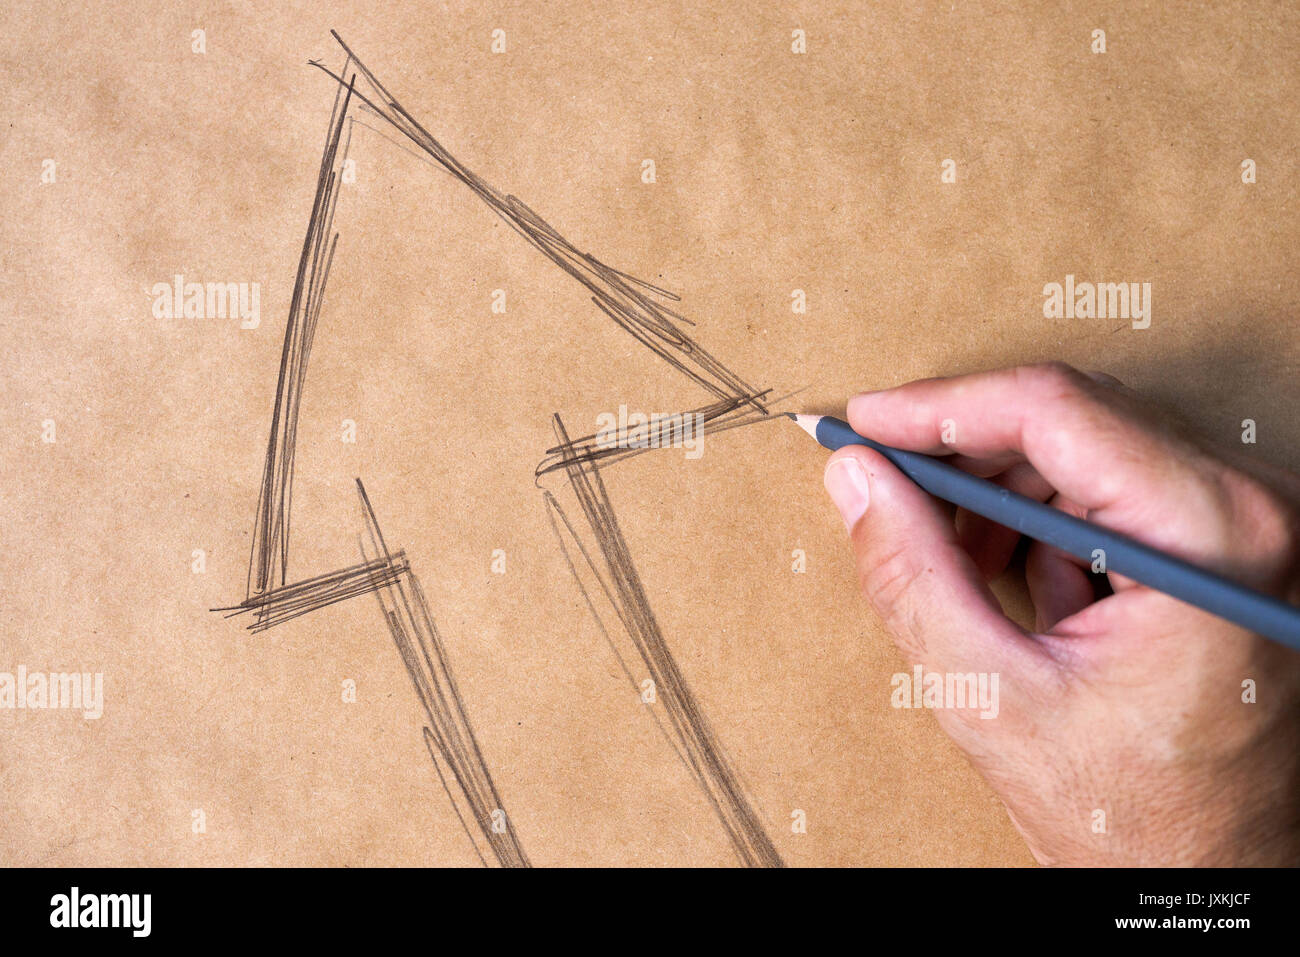 Hand sketching arrow symbol on paper as concept of decision making and choosing direction in life Stock Photo